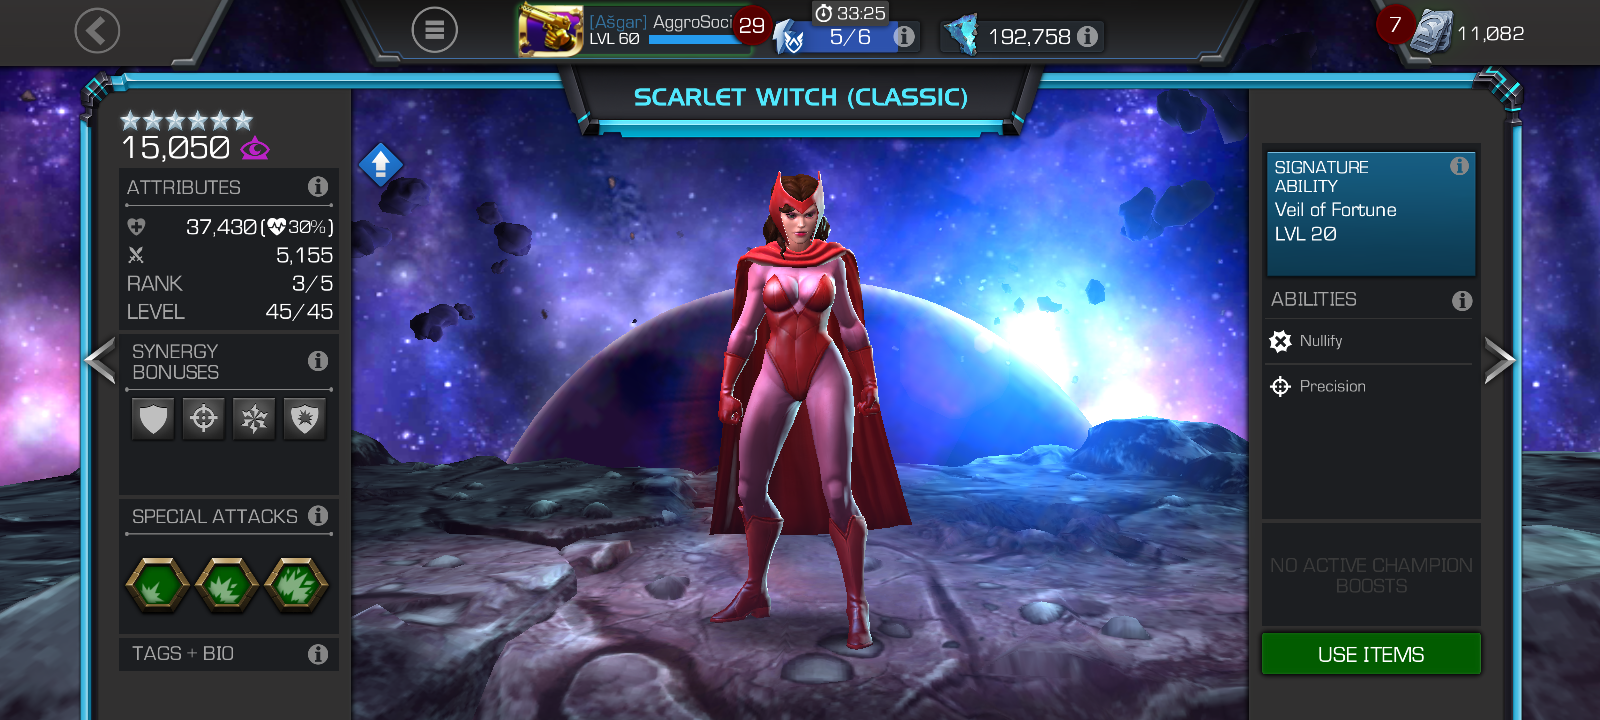 Scarlet Witch (Classic)